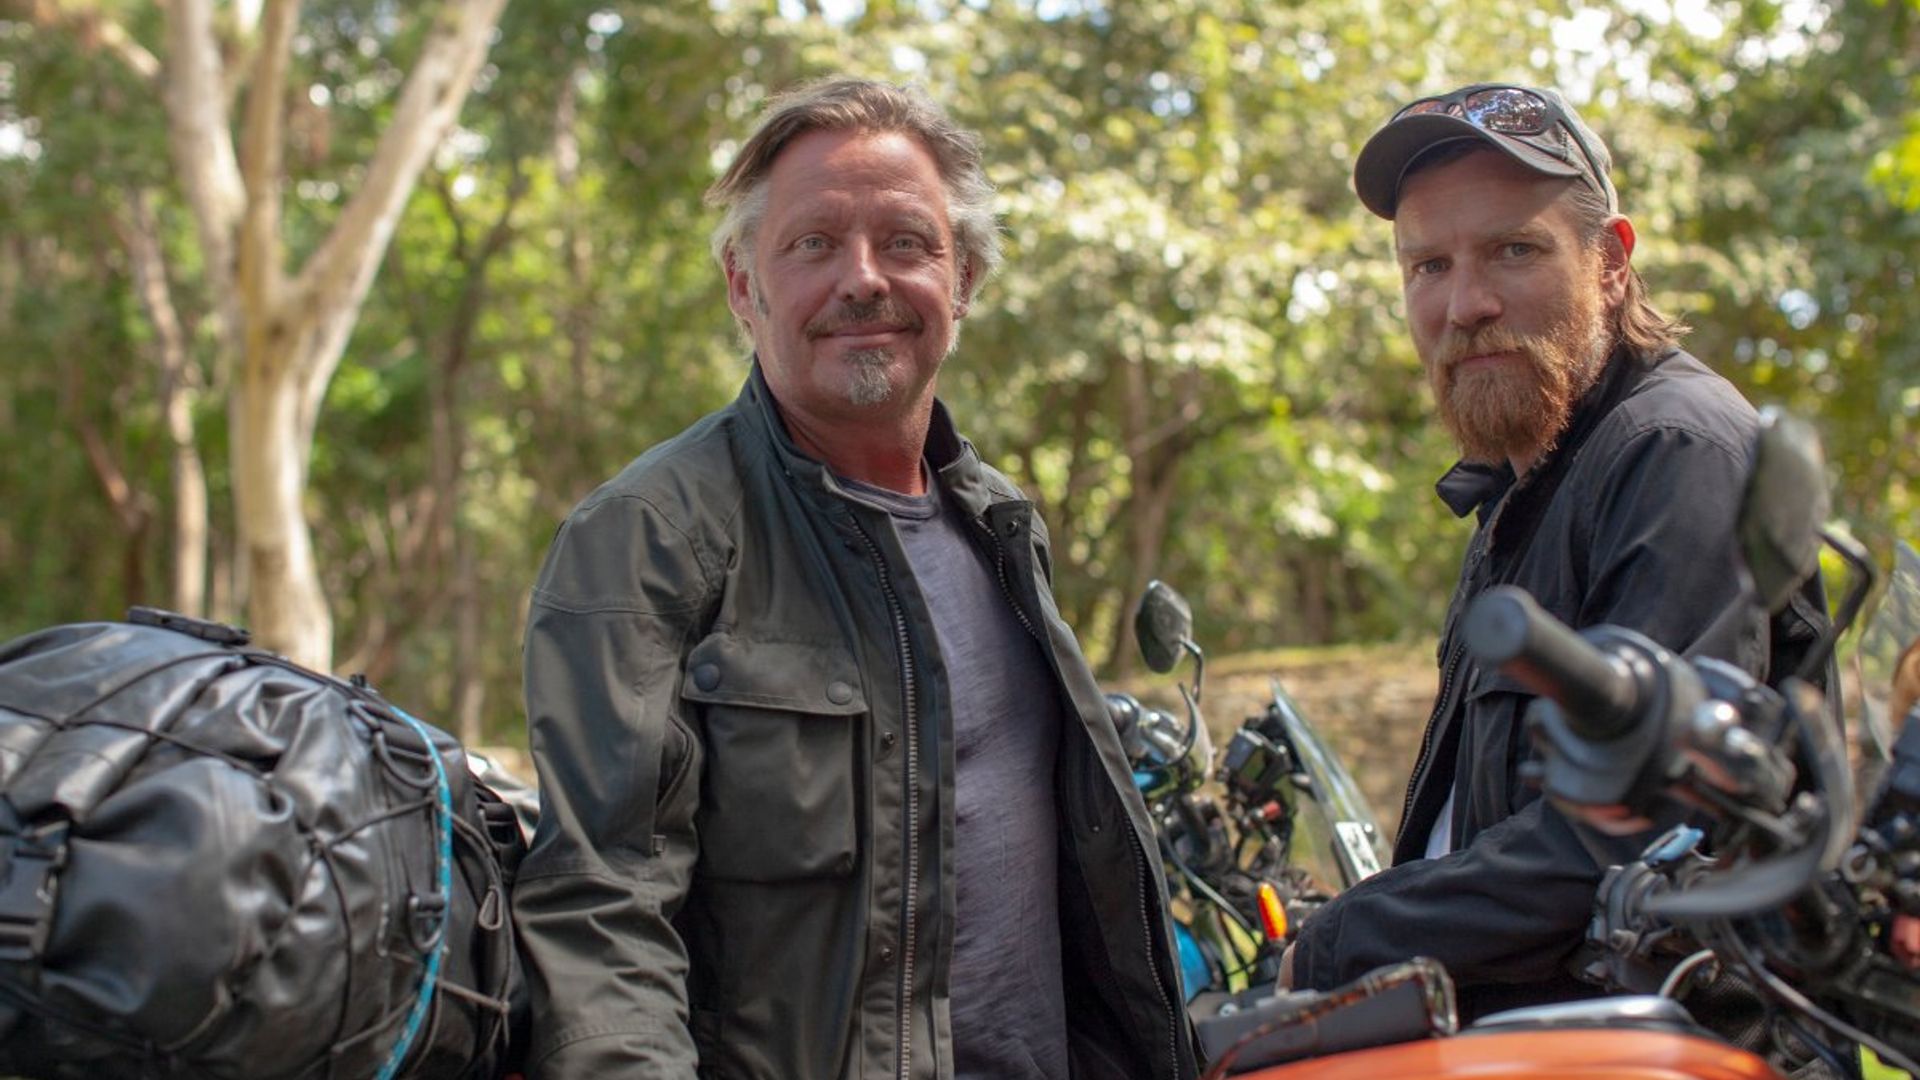 Ewan McGregor talks Charlie Boorman's horrific motorcycle accident - find out what happened